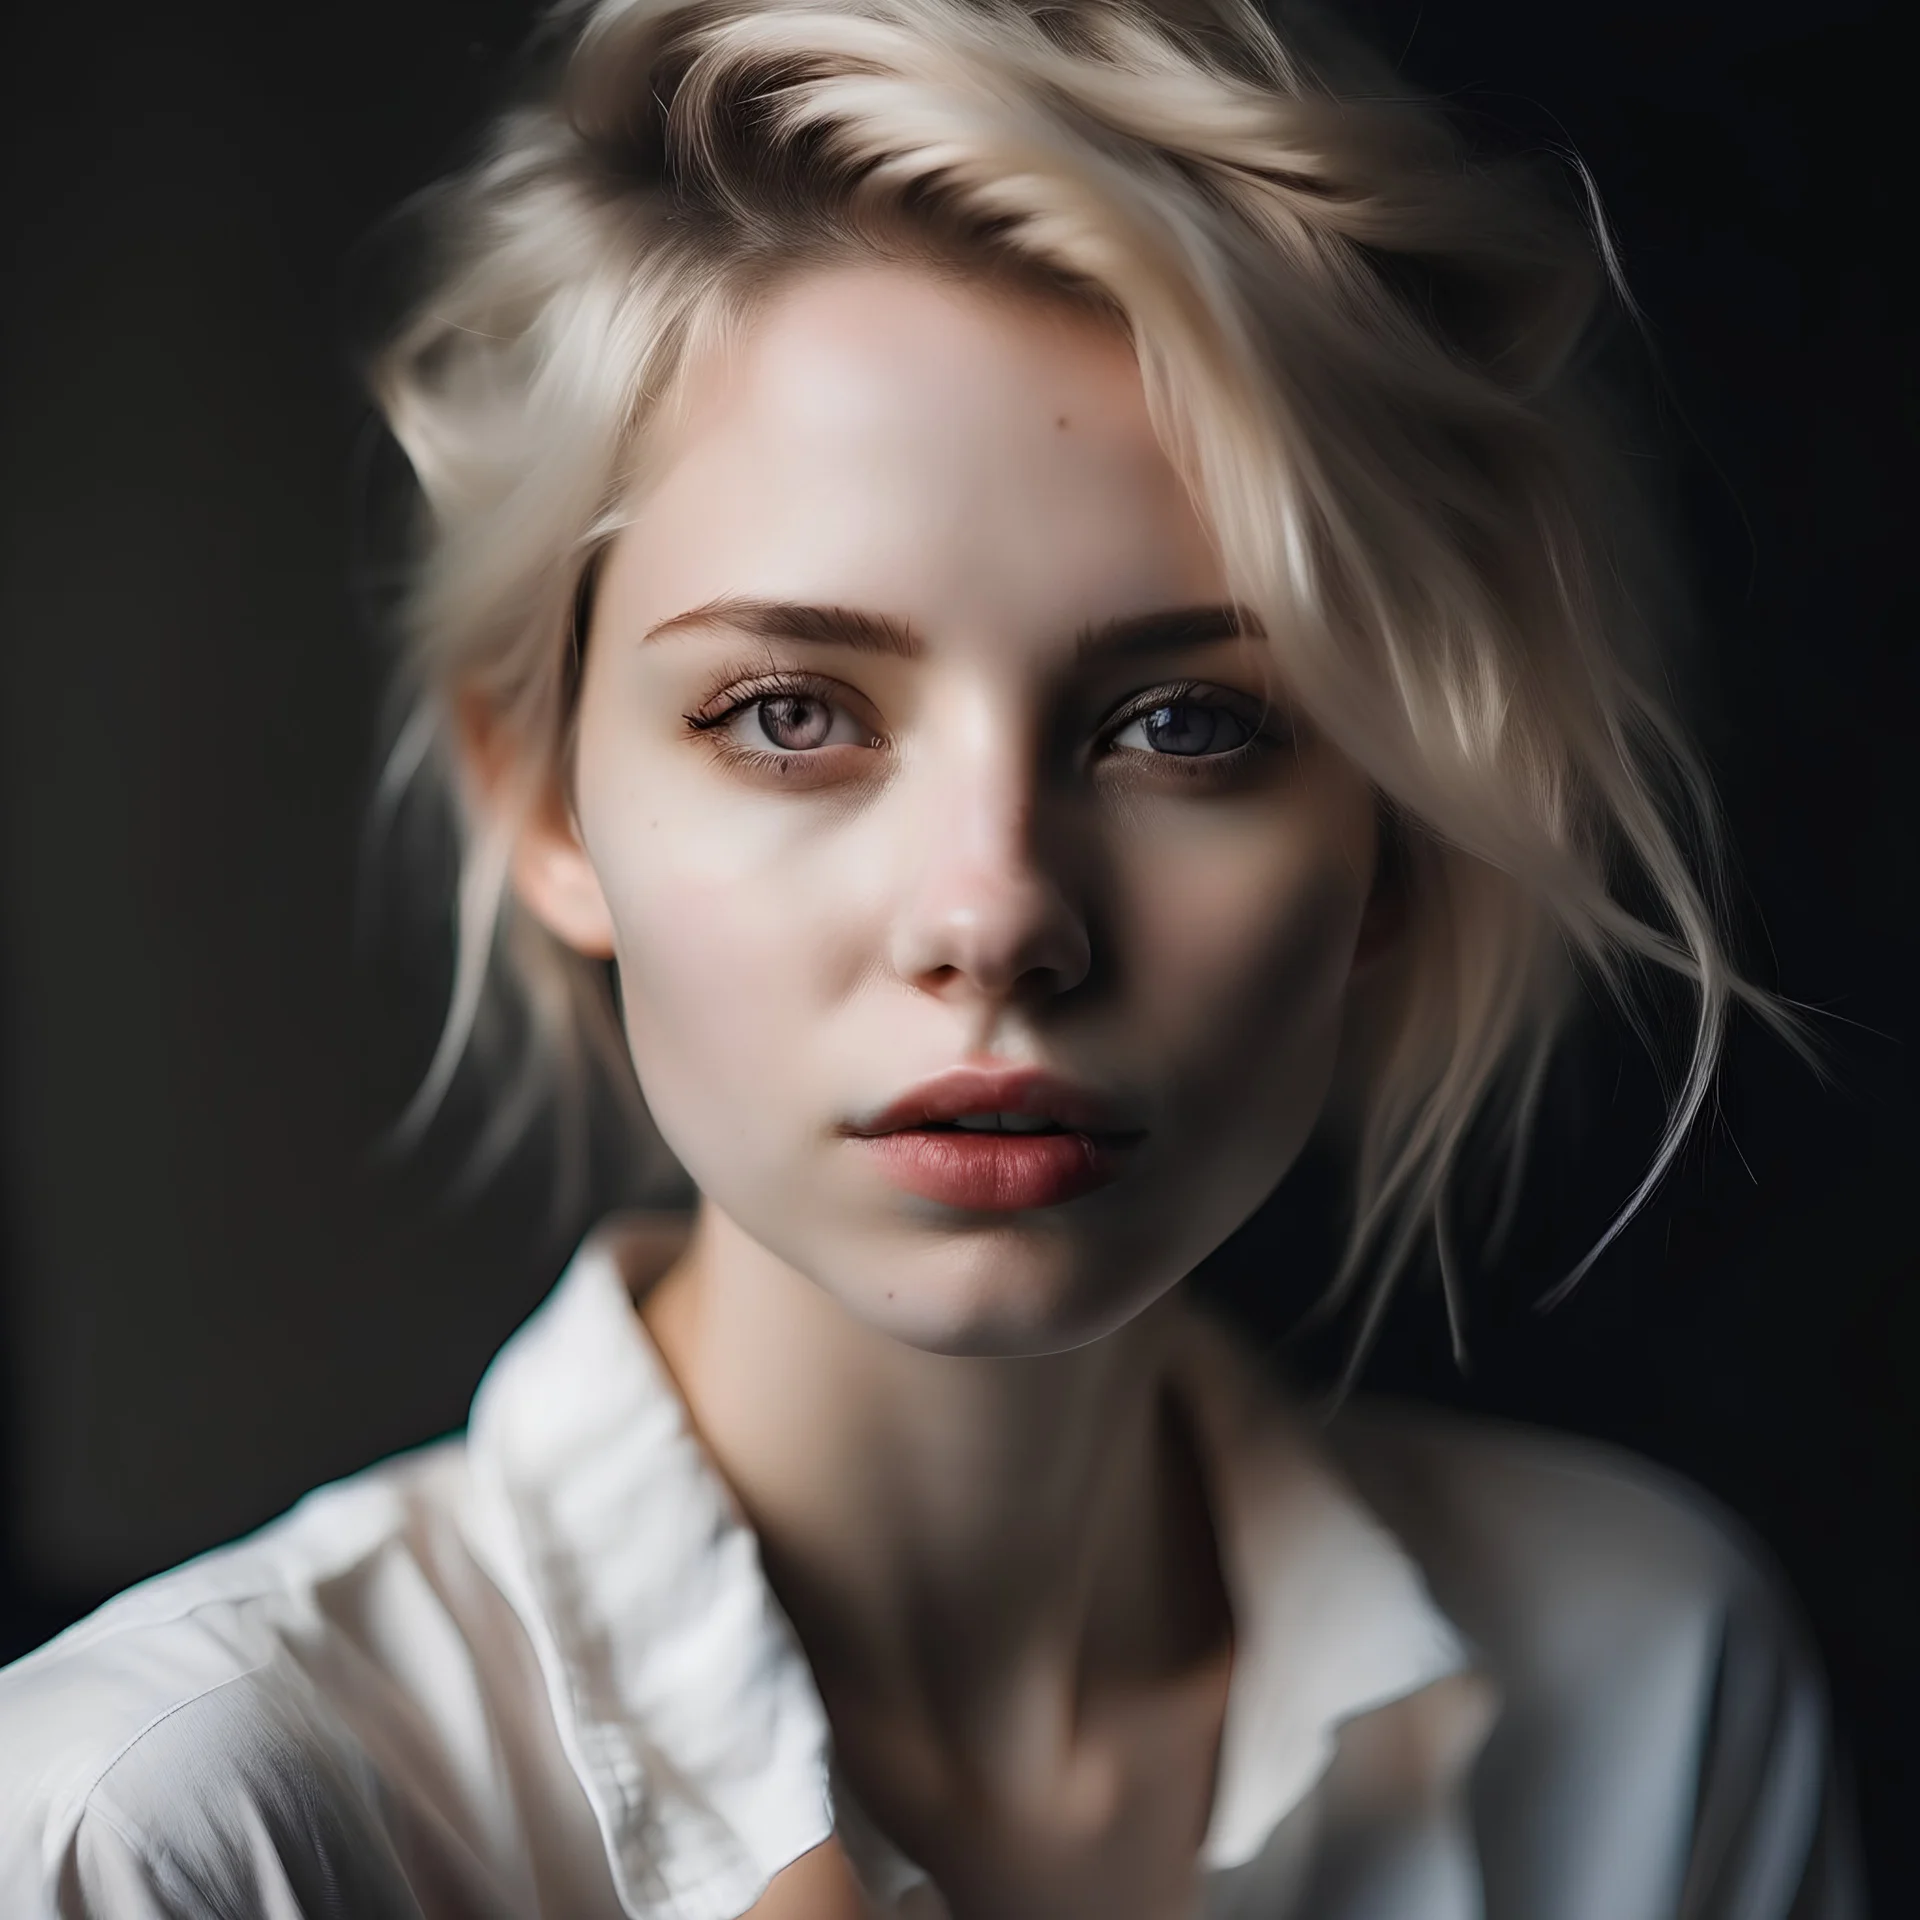 woman, twenty years old, white blond shortish hair, loose strands framing face, wavy, strong facial features, soft nose, dark grey eyes, light pale skin, rose lips whithe shirt, portrait, close up, beatiful young woman, many shadows, hair tied up, loose strands framing face, little make up, ferfect skin